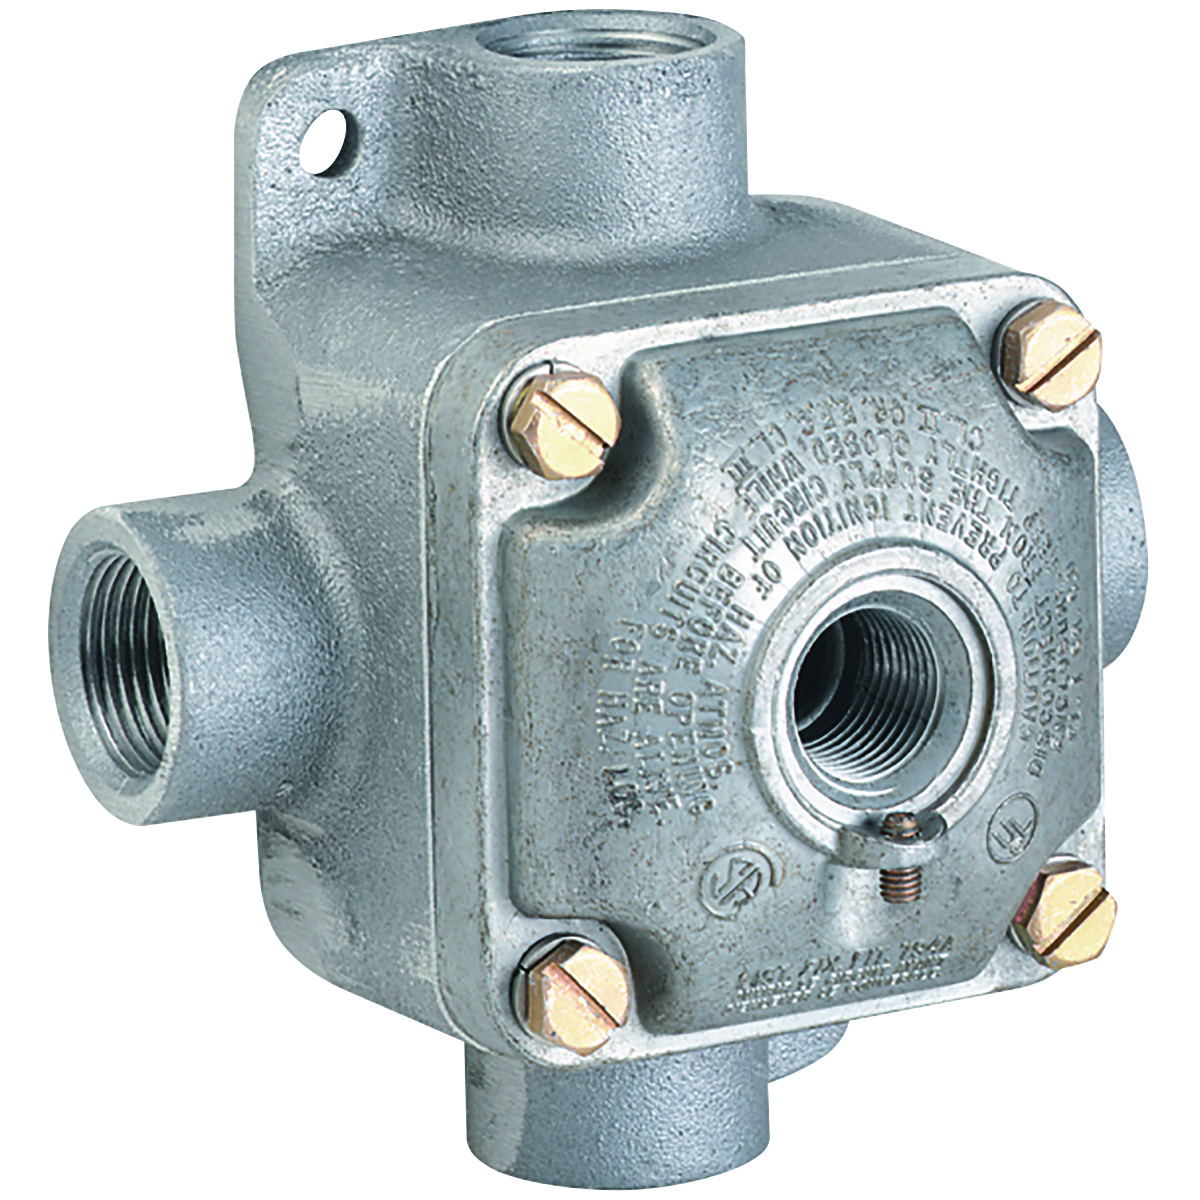 JL SERIES - ALUMINUM OUTLET BODY WITH COVER - WITH HUB COVER - BOX TYPEX - BOX HUB SIZE 3/4 INCH - COVER HUB SIZE 3/4 INCH